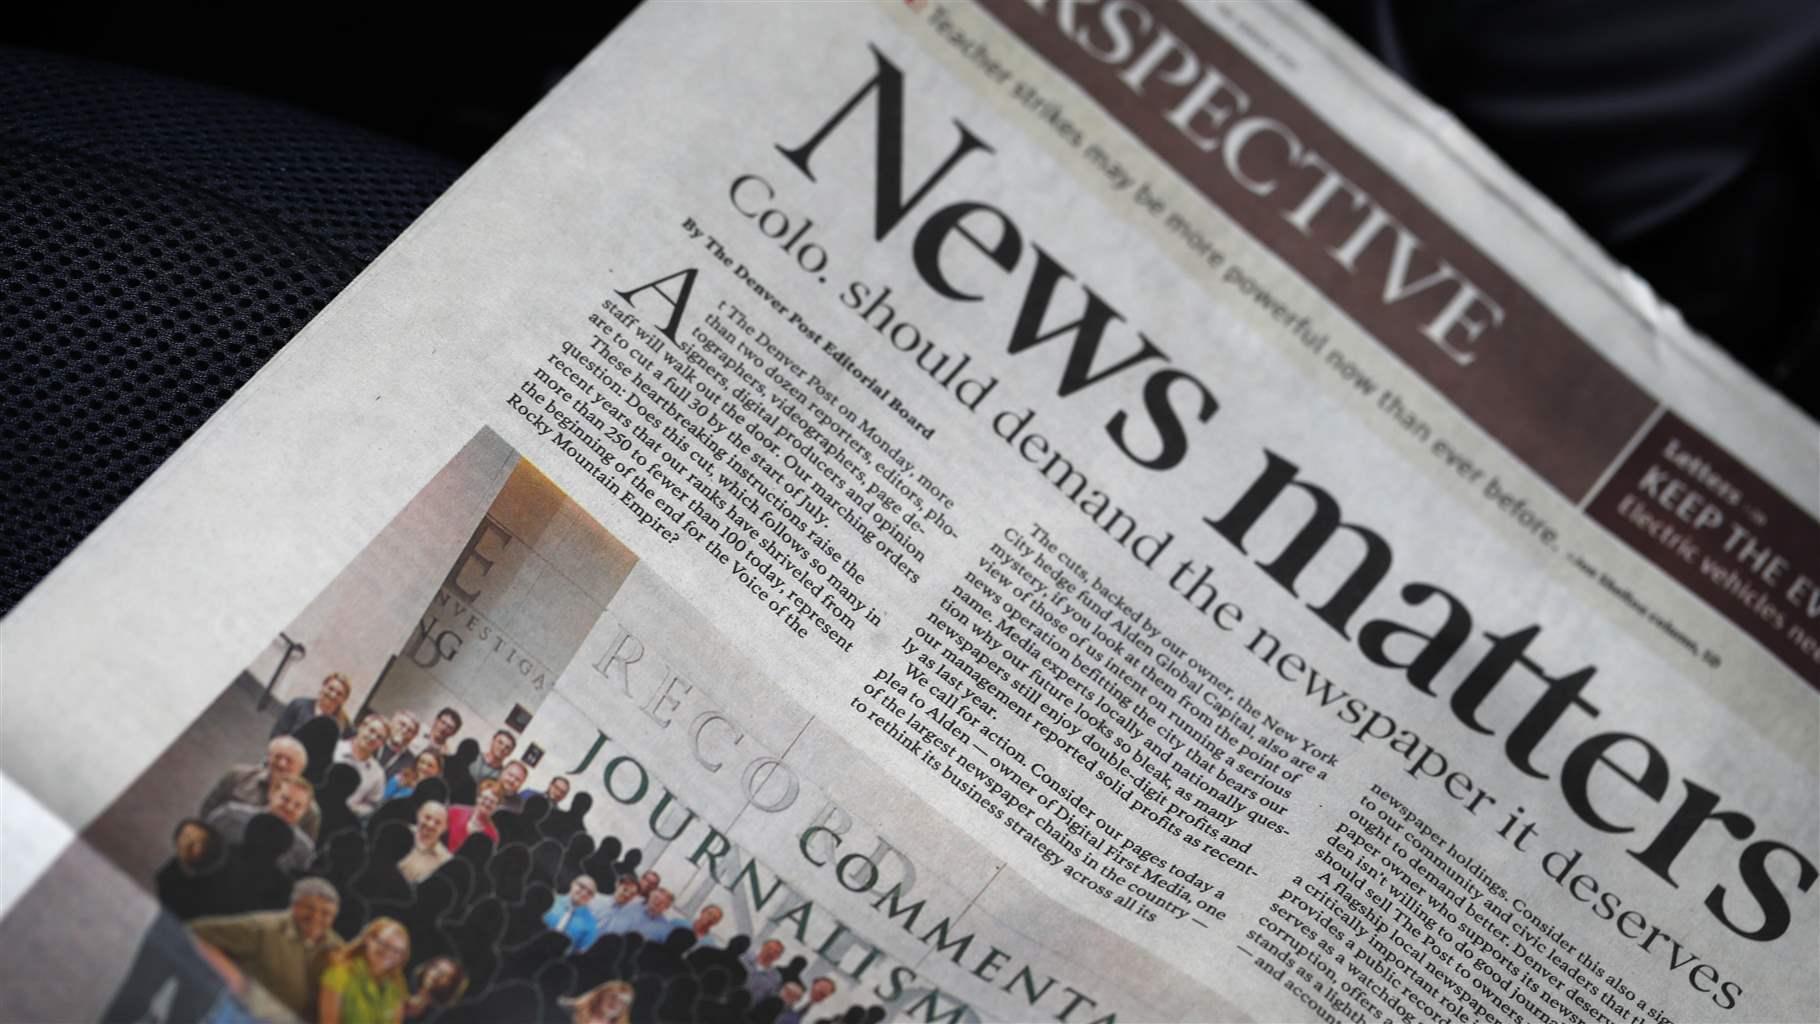 things that will be gone in 30 years - Newspaper - Teacher strikes may be more powerfut now than ever before. Spective News matters Colo. should demand the newspaper it deserves A By The Denver Post Editorial Board The Denver Post on Monday, more than two